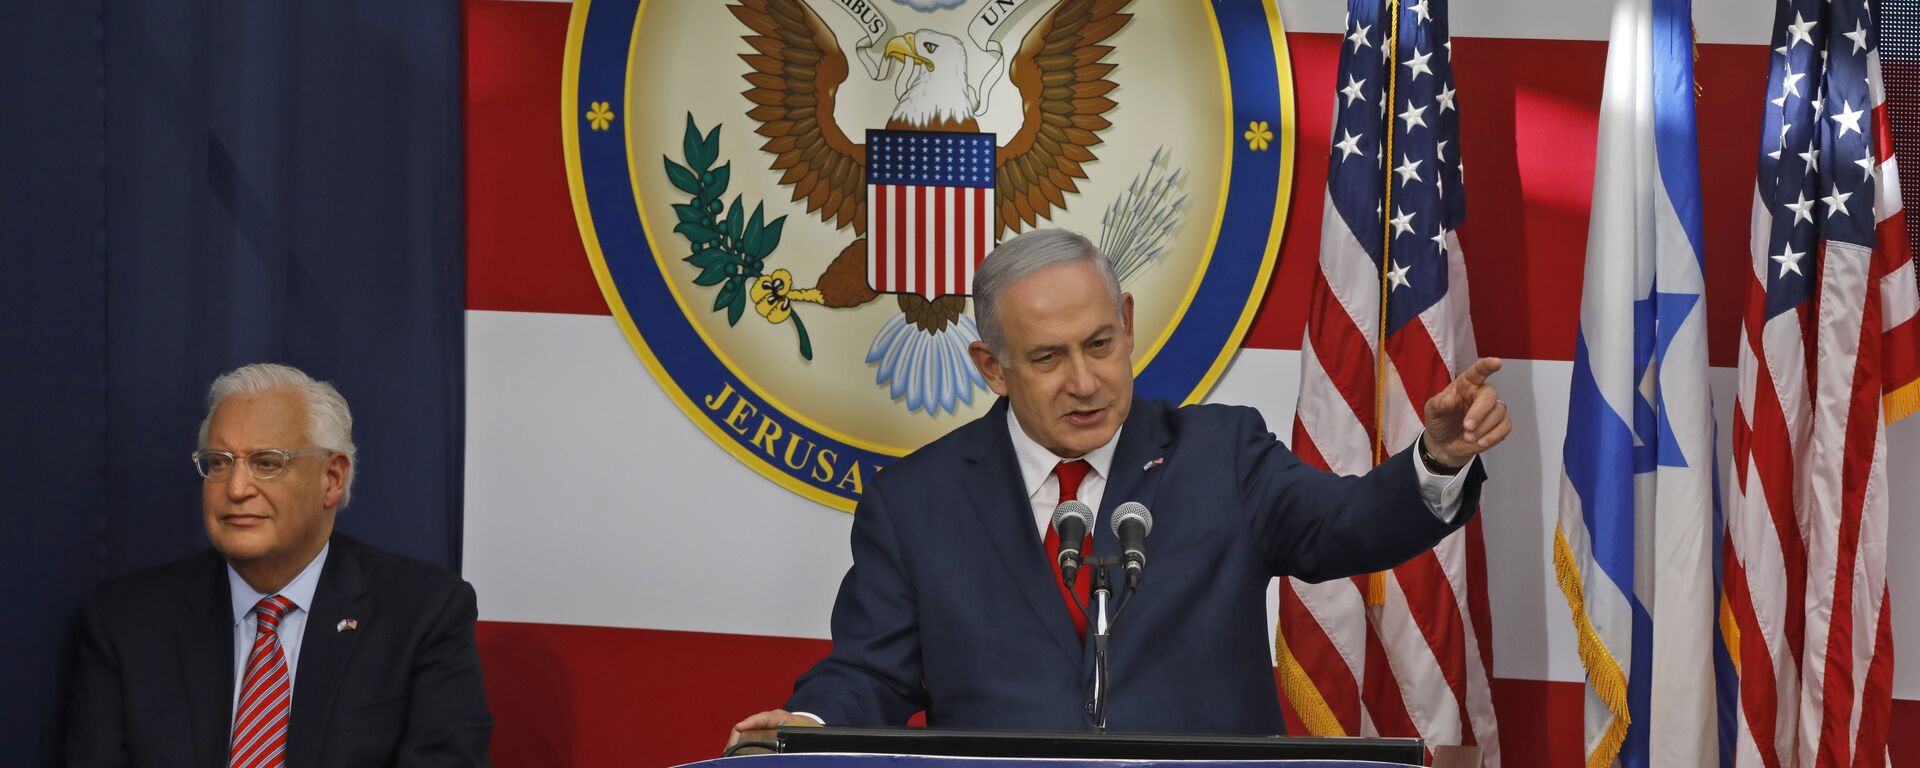 Israel's Prime Minister Benjamin Netanyahu delivers a speech during the opening of the US embassy in Jerusalem on May 14, 2018 - Sputnik International, 1920, 14.05.2018